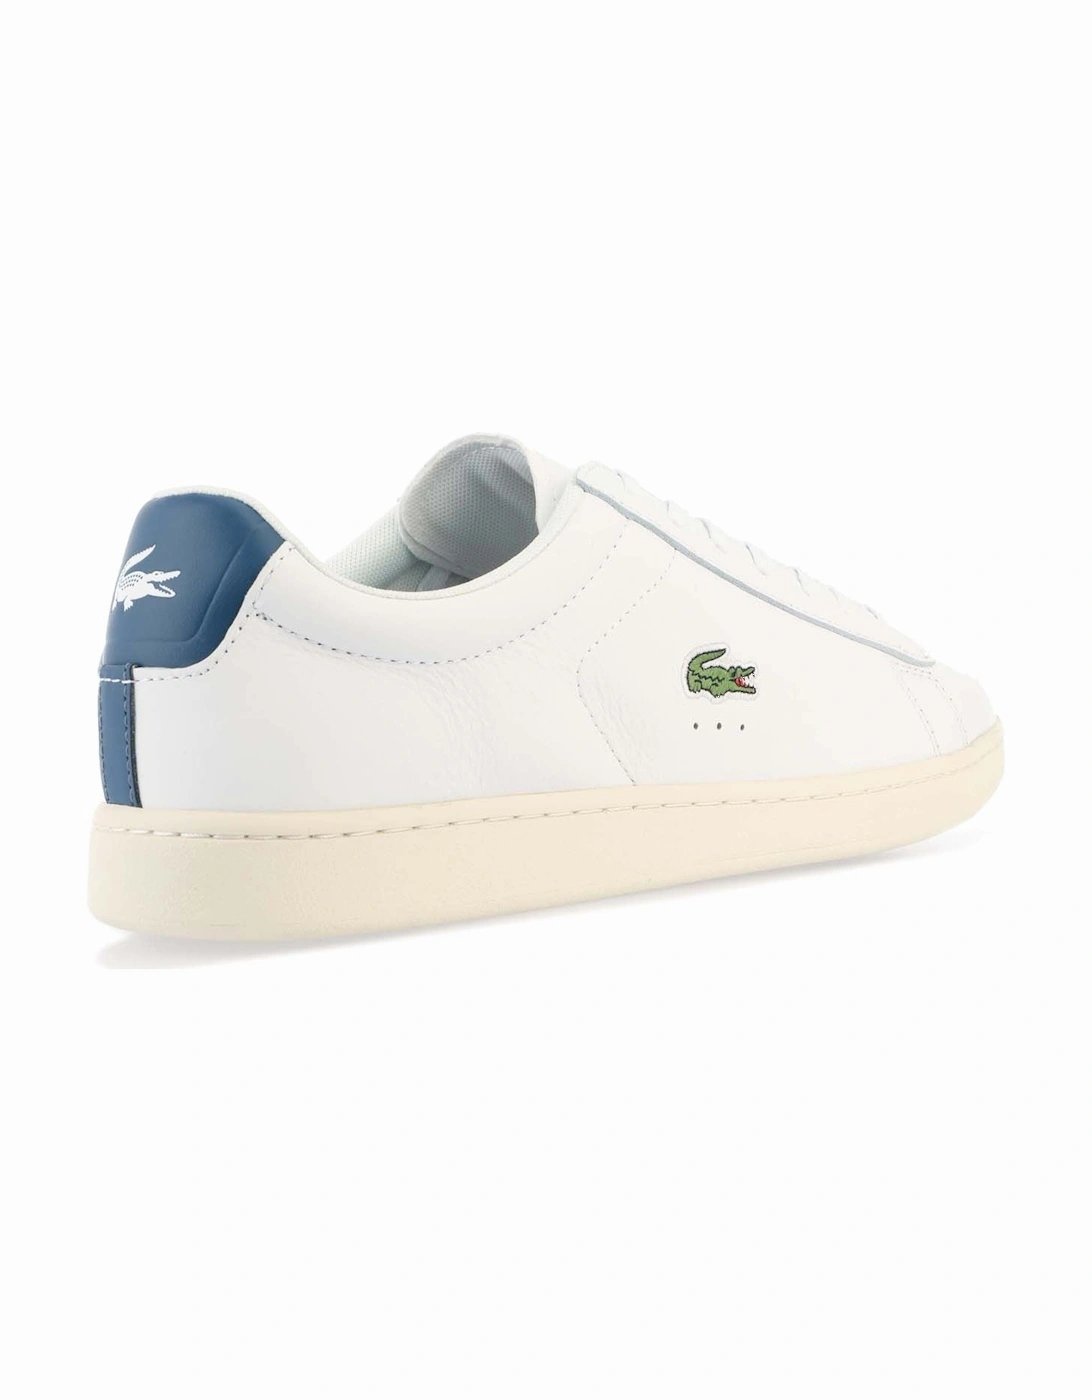 Mens Carnaby Evo Leather Accent Heel Trainers